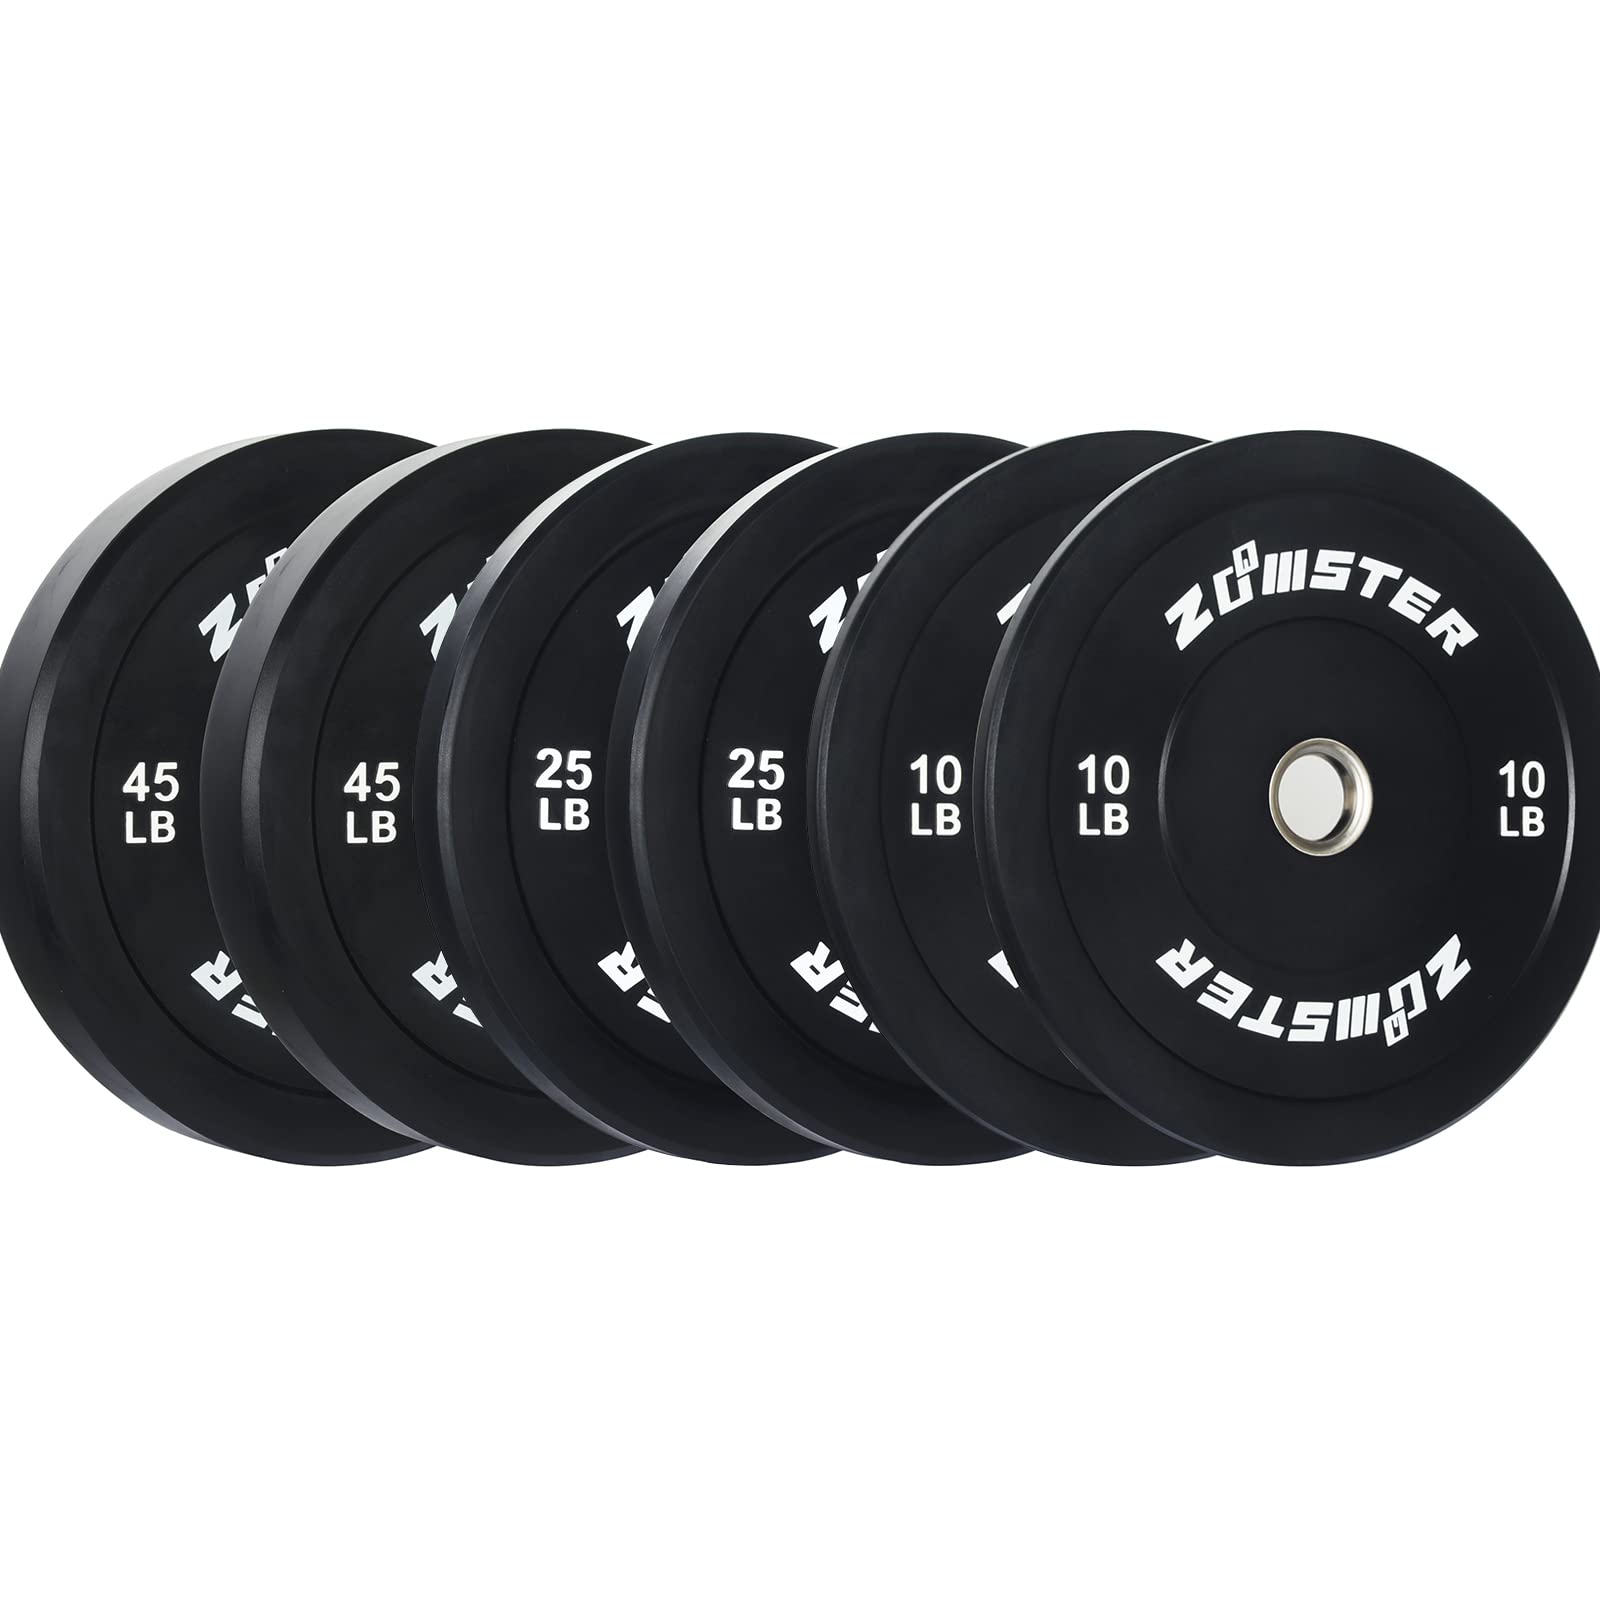 Zoomster 10LB 25LB 45LB Bumper Plate Olympic Weight Plate Bumper Weight Plate with Steel Insert (160LB Weight Set)